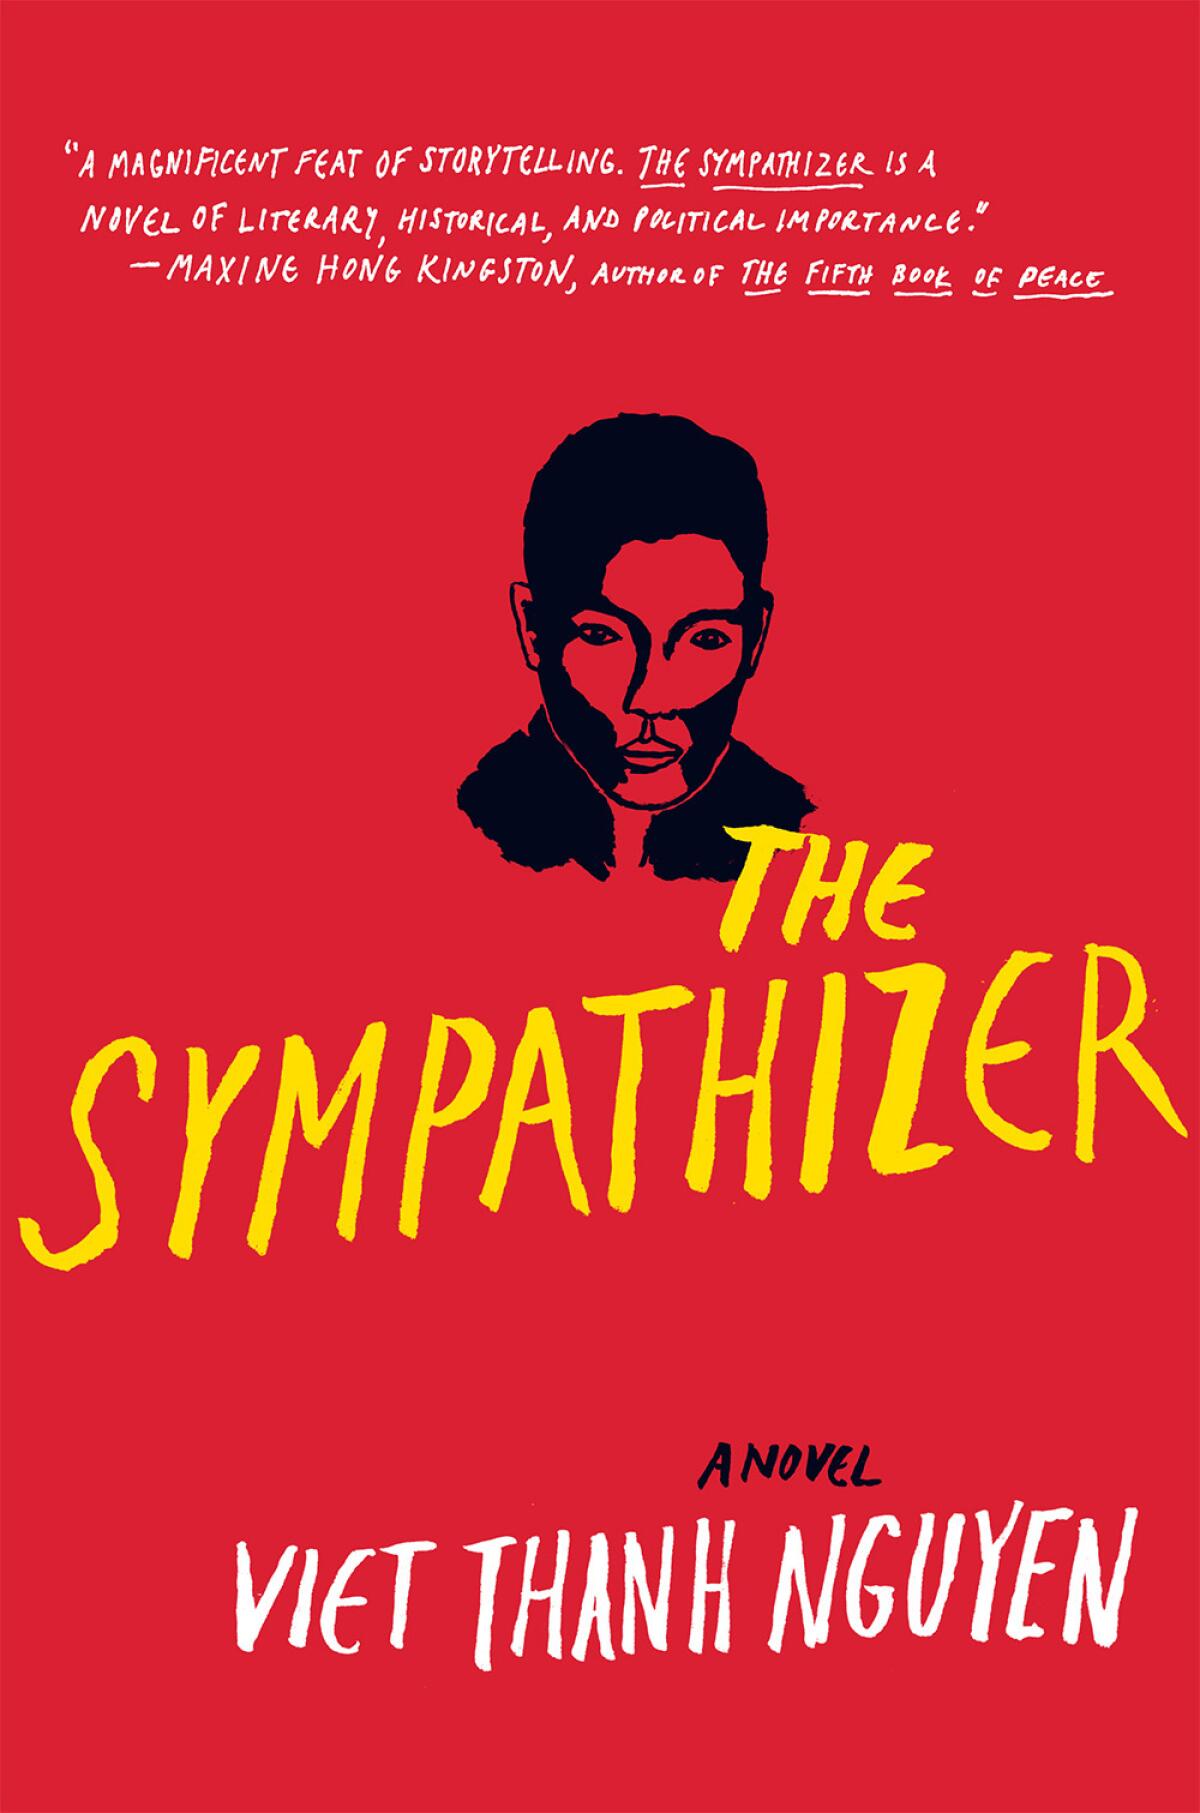 Cover of the book "The Sympathizer" by Viet Thanh Nguyen. Published by Grove Press (For book cover) Credit; Grove Press